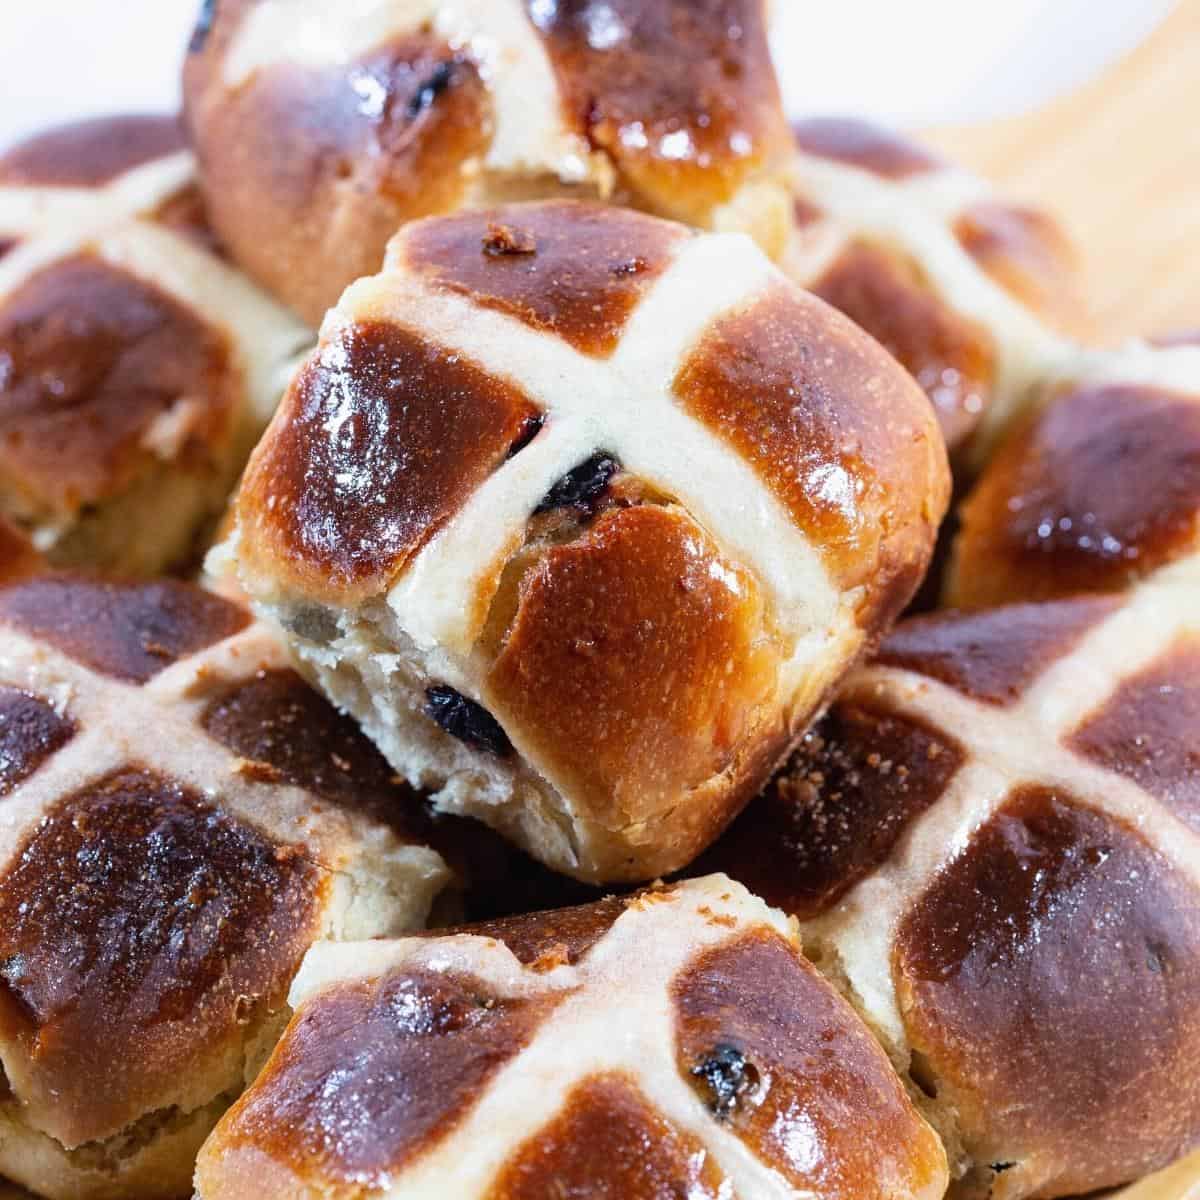 Stack of spiced buns for Good Friday with cross.